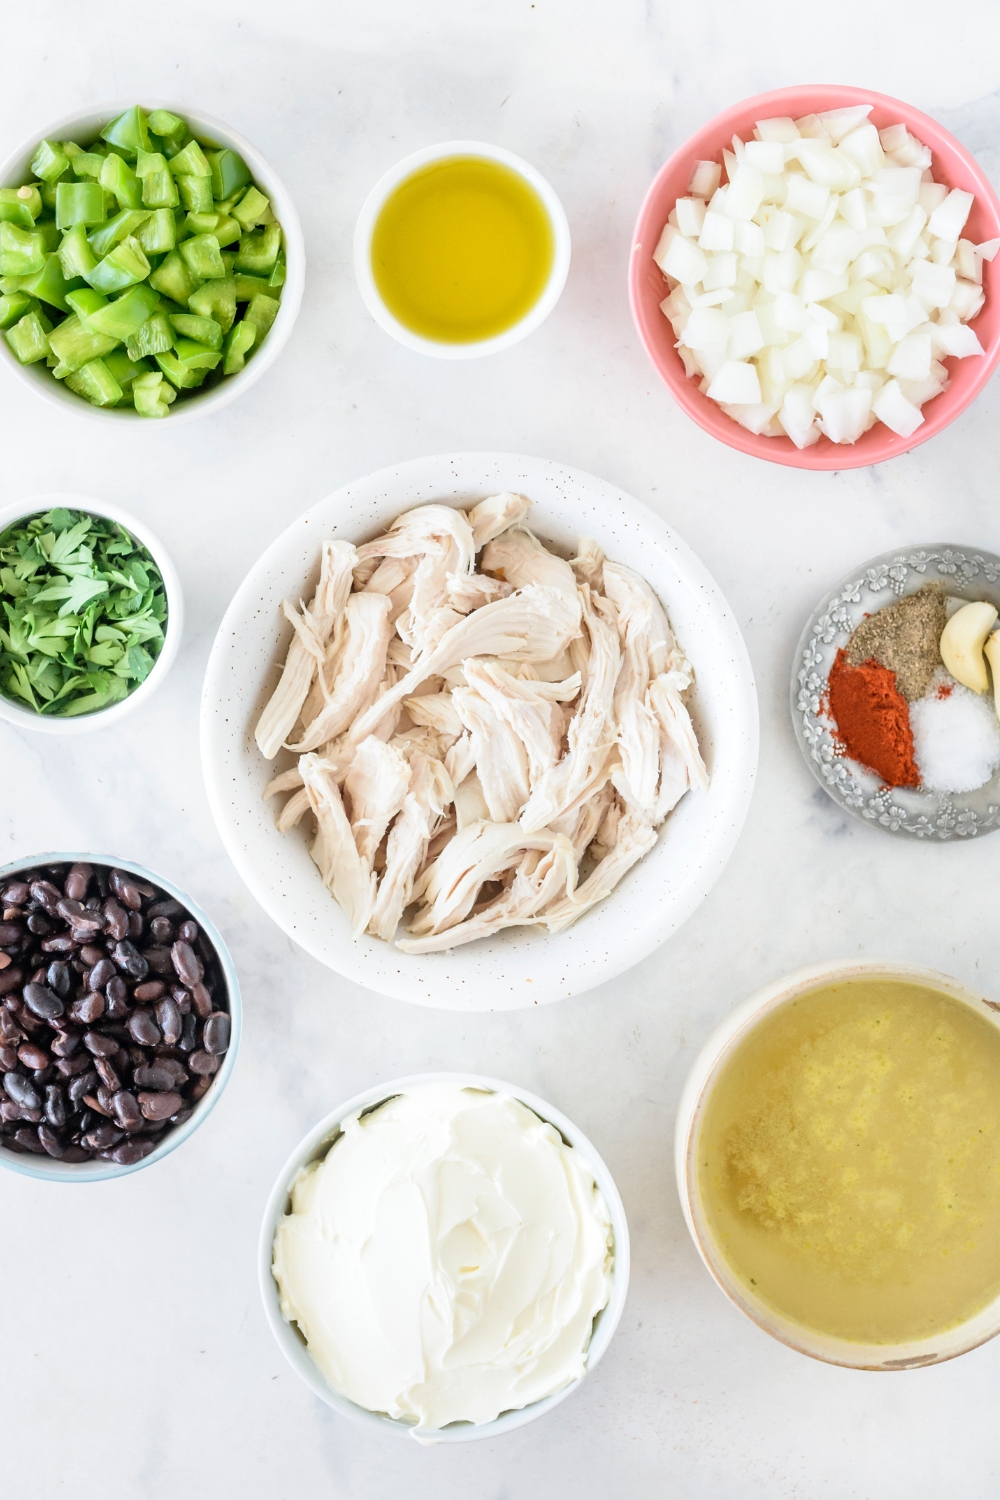 An assortment of ingredients including bowls of shredded chicken, diced onion, diced bell pepper, black beans, chicken broth, cream cheese, and spices.